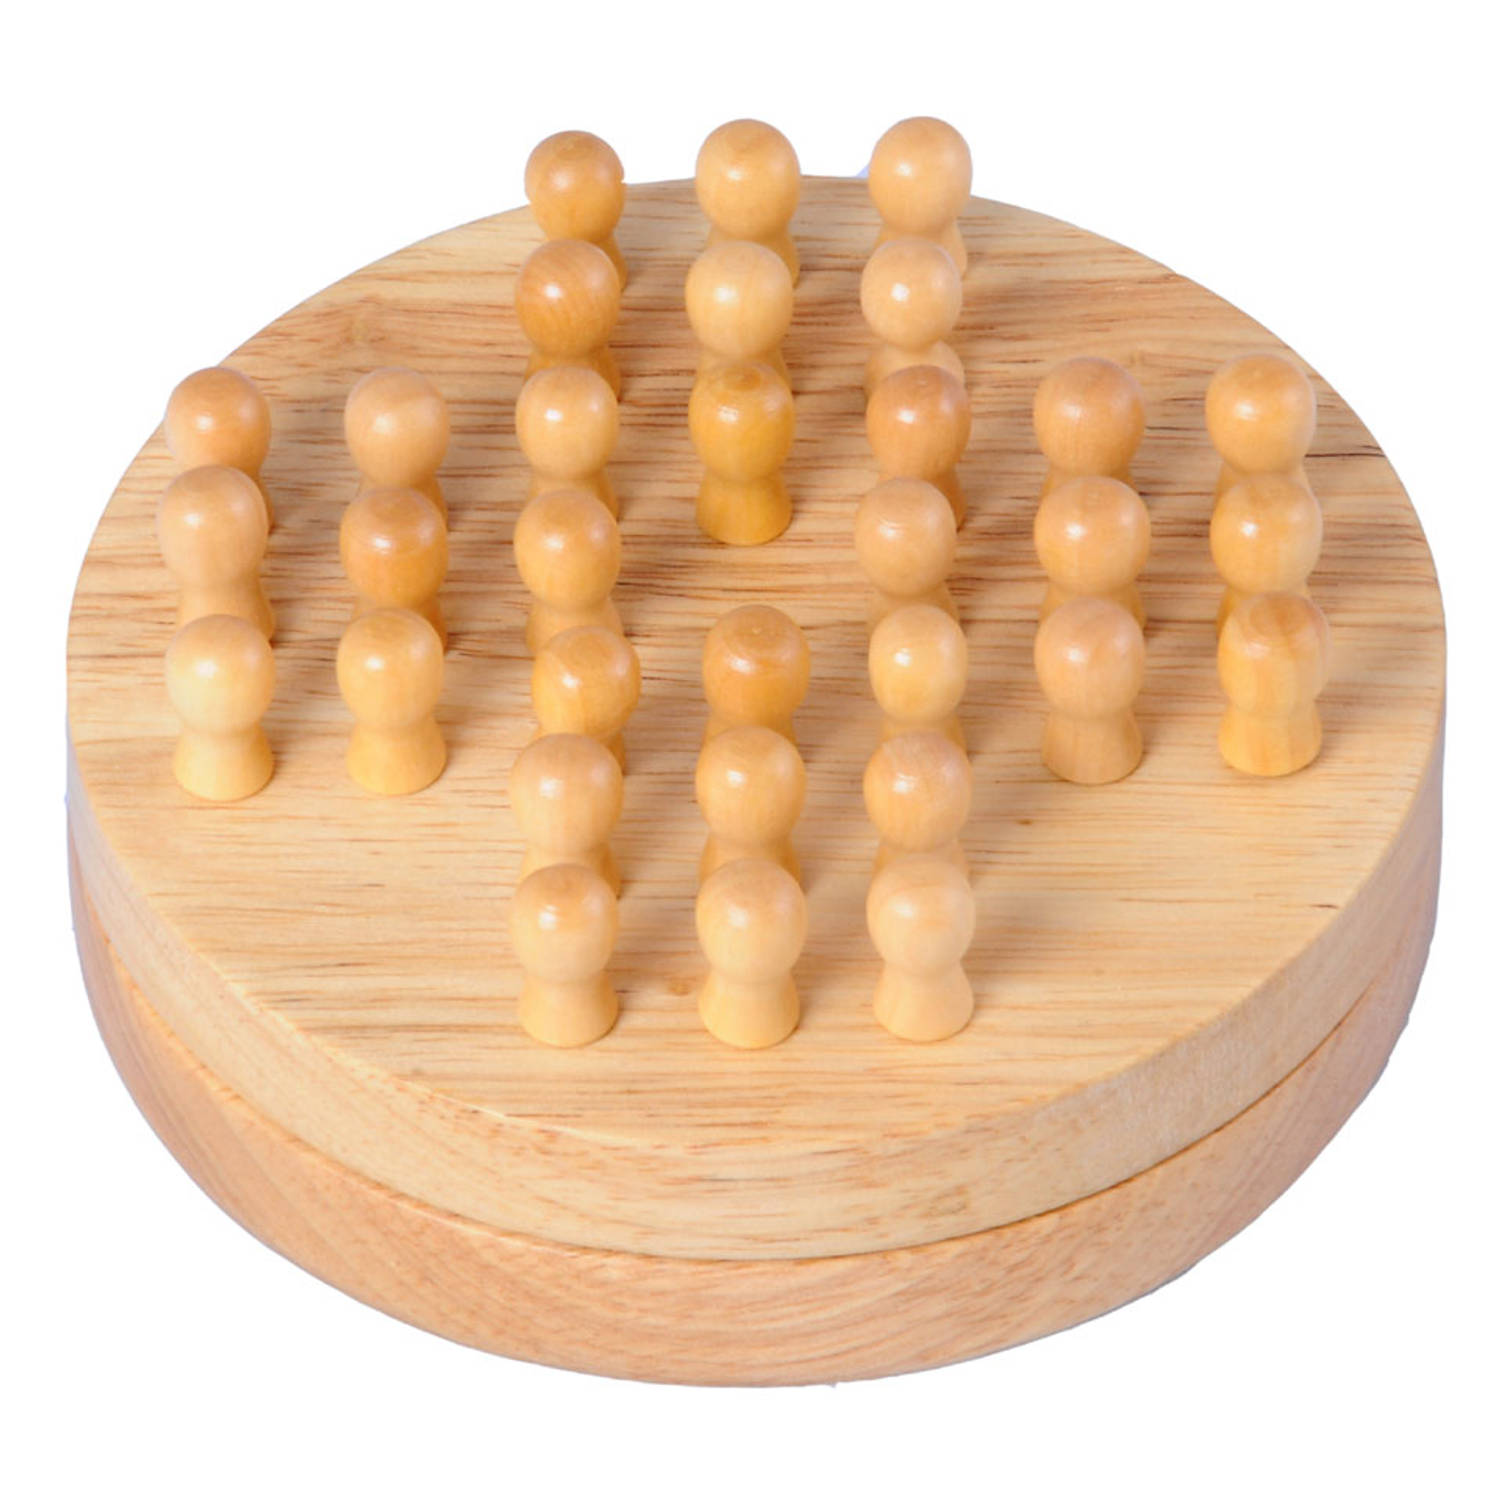 RUBBER WOOD TRAVEL SOLITAIR INCLUDING 33 WOODEN PEGS AND RULES OF THE GAME - DIAMETER 12 CM